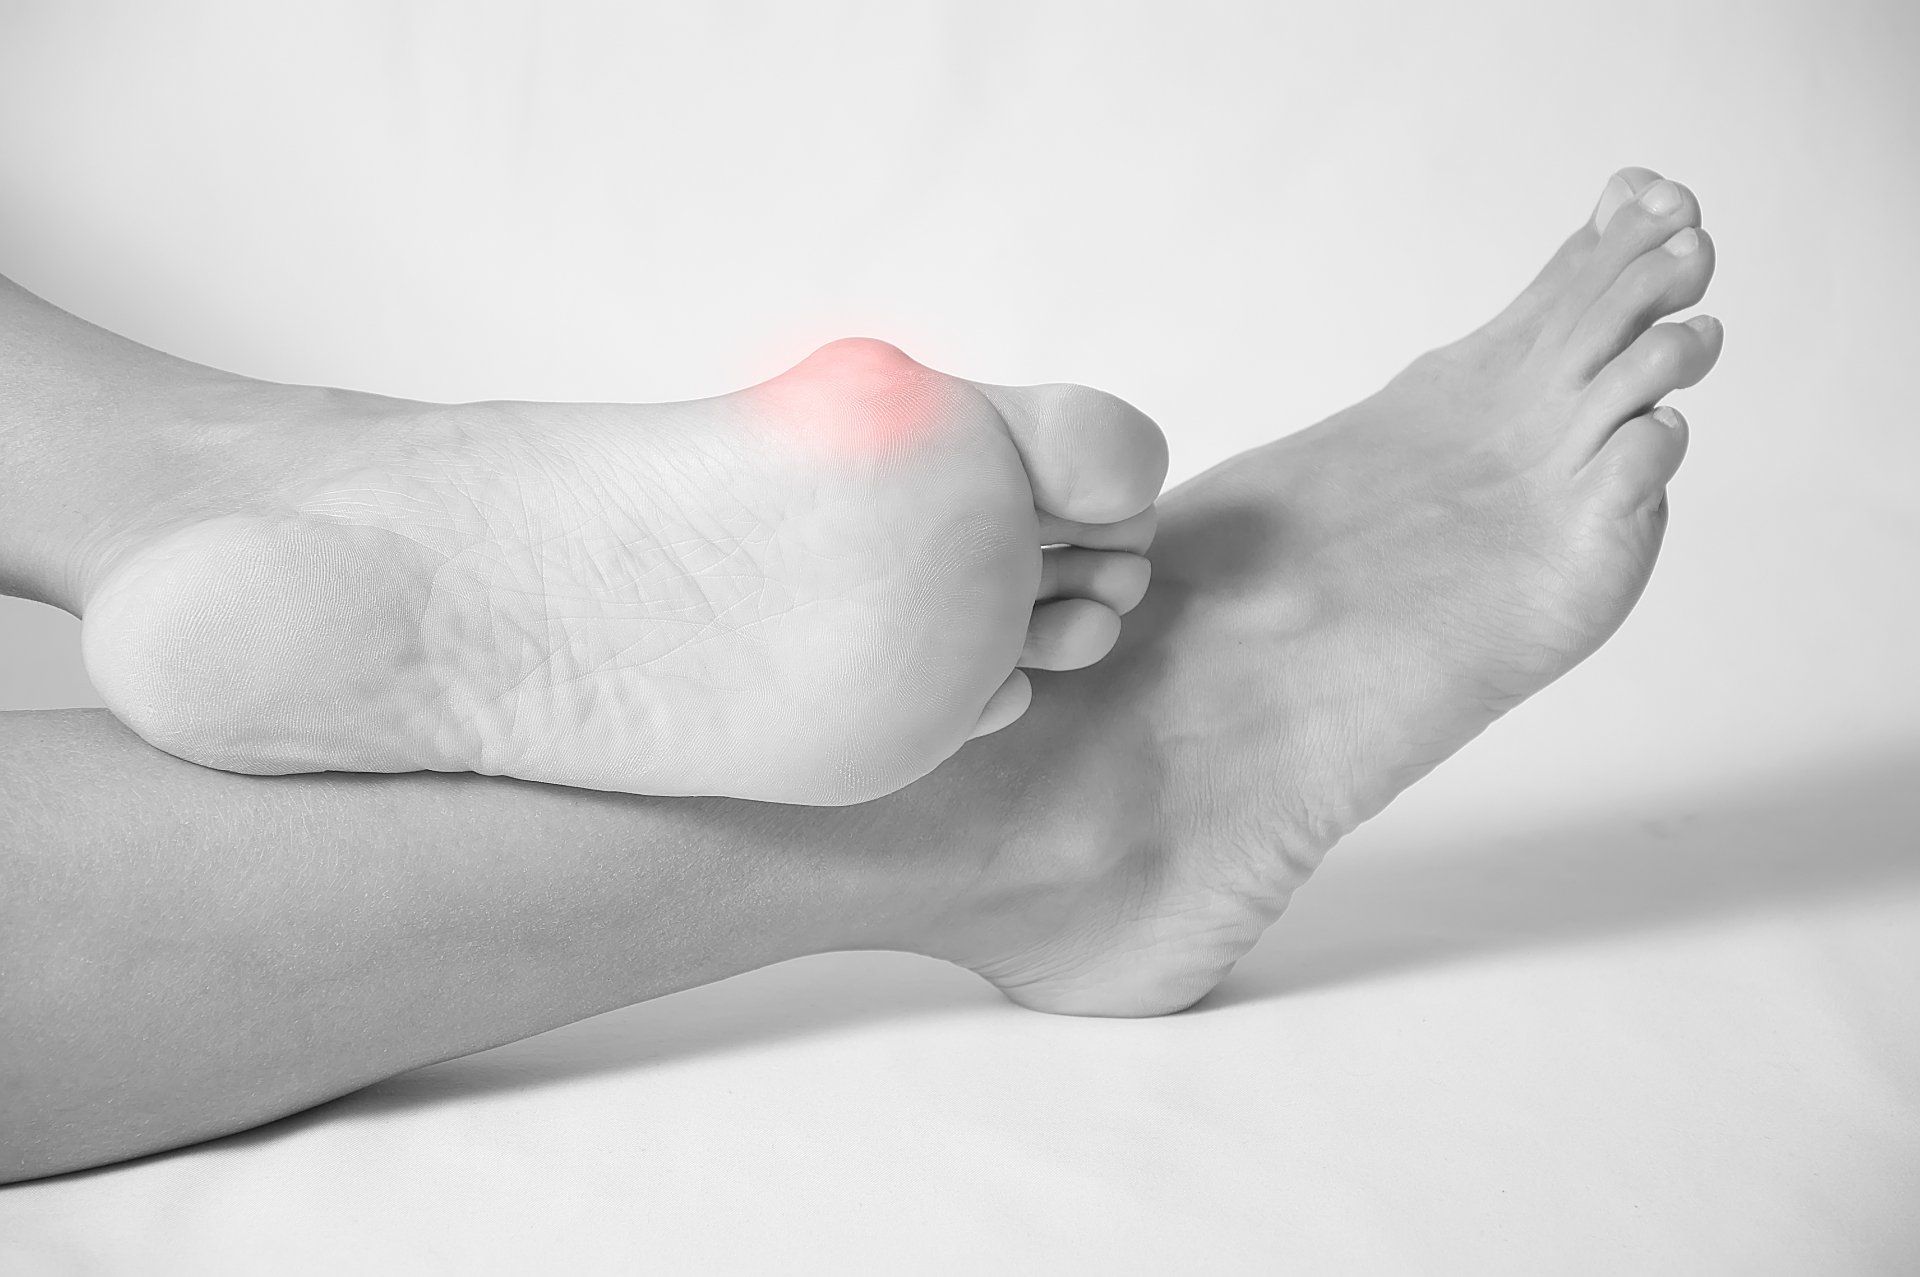 Painful-Bunion-on-foot